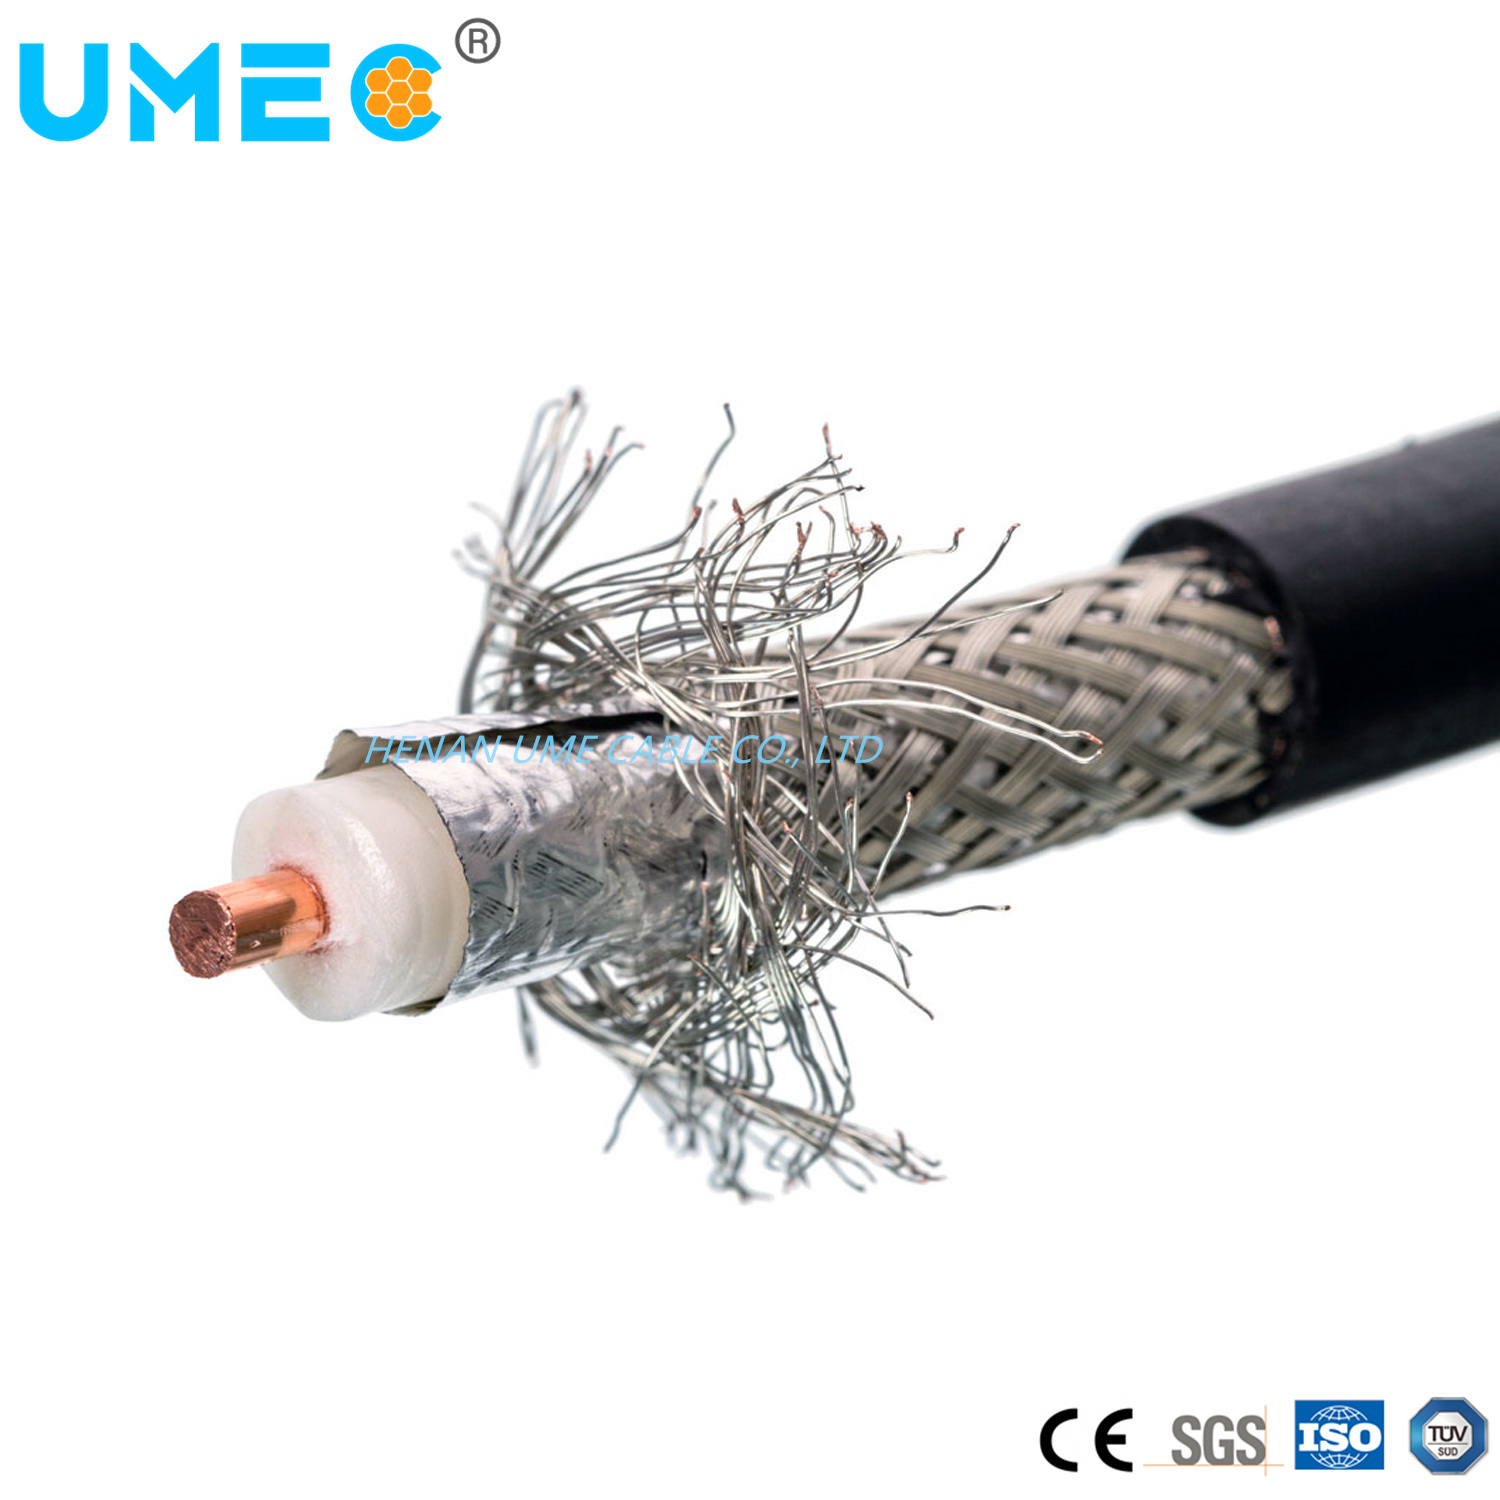 Wholesale RG6 Coaxial Cable Rg-6 CCS / Communication Cable RG6 Cord Price